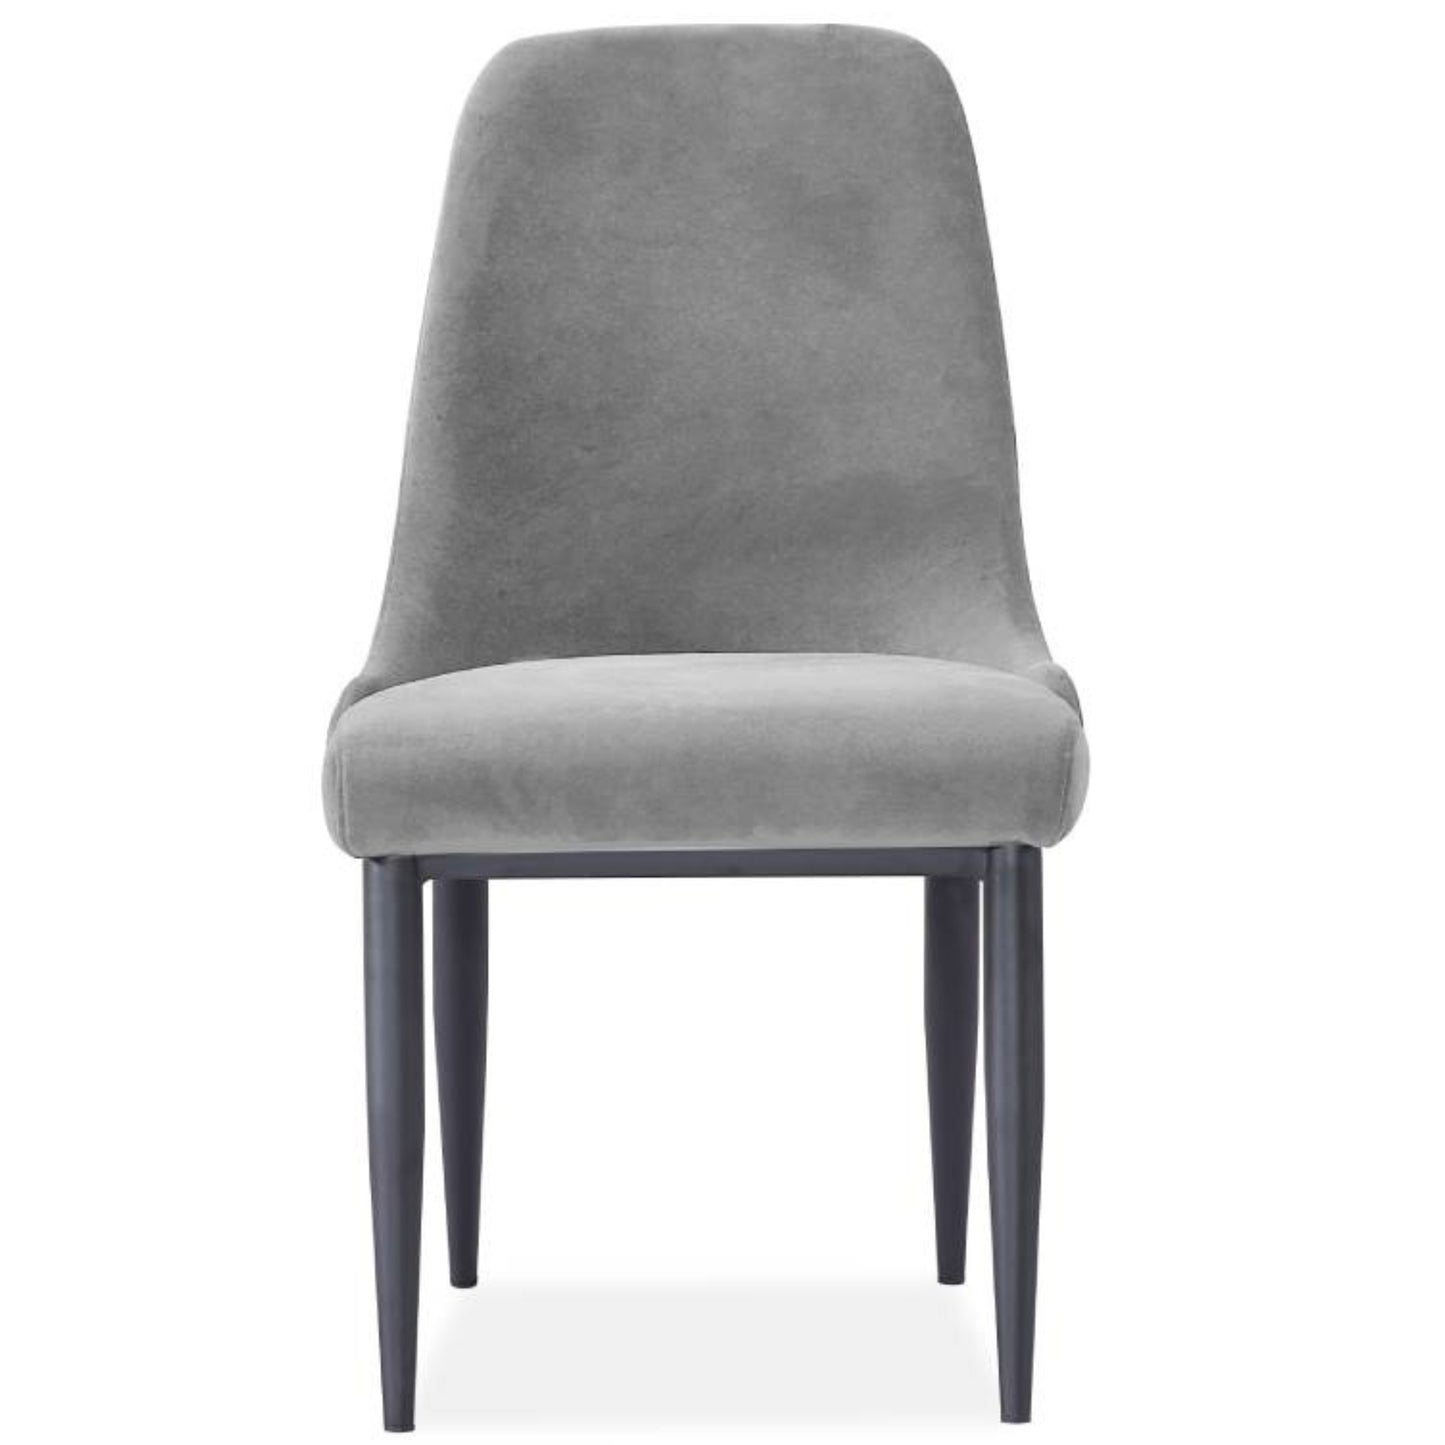 Eva Dining Chair Set of 4 Fabric Seat with Metal Frame - Grey